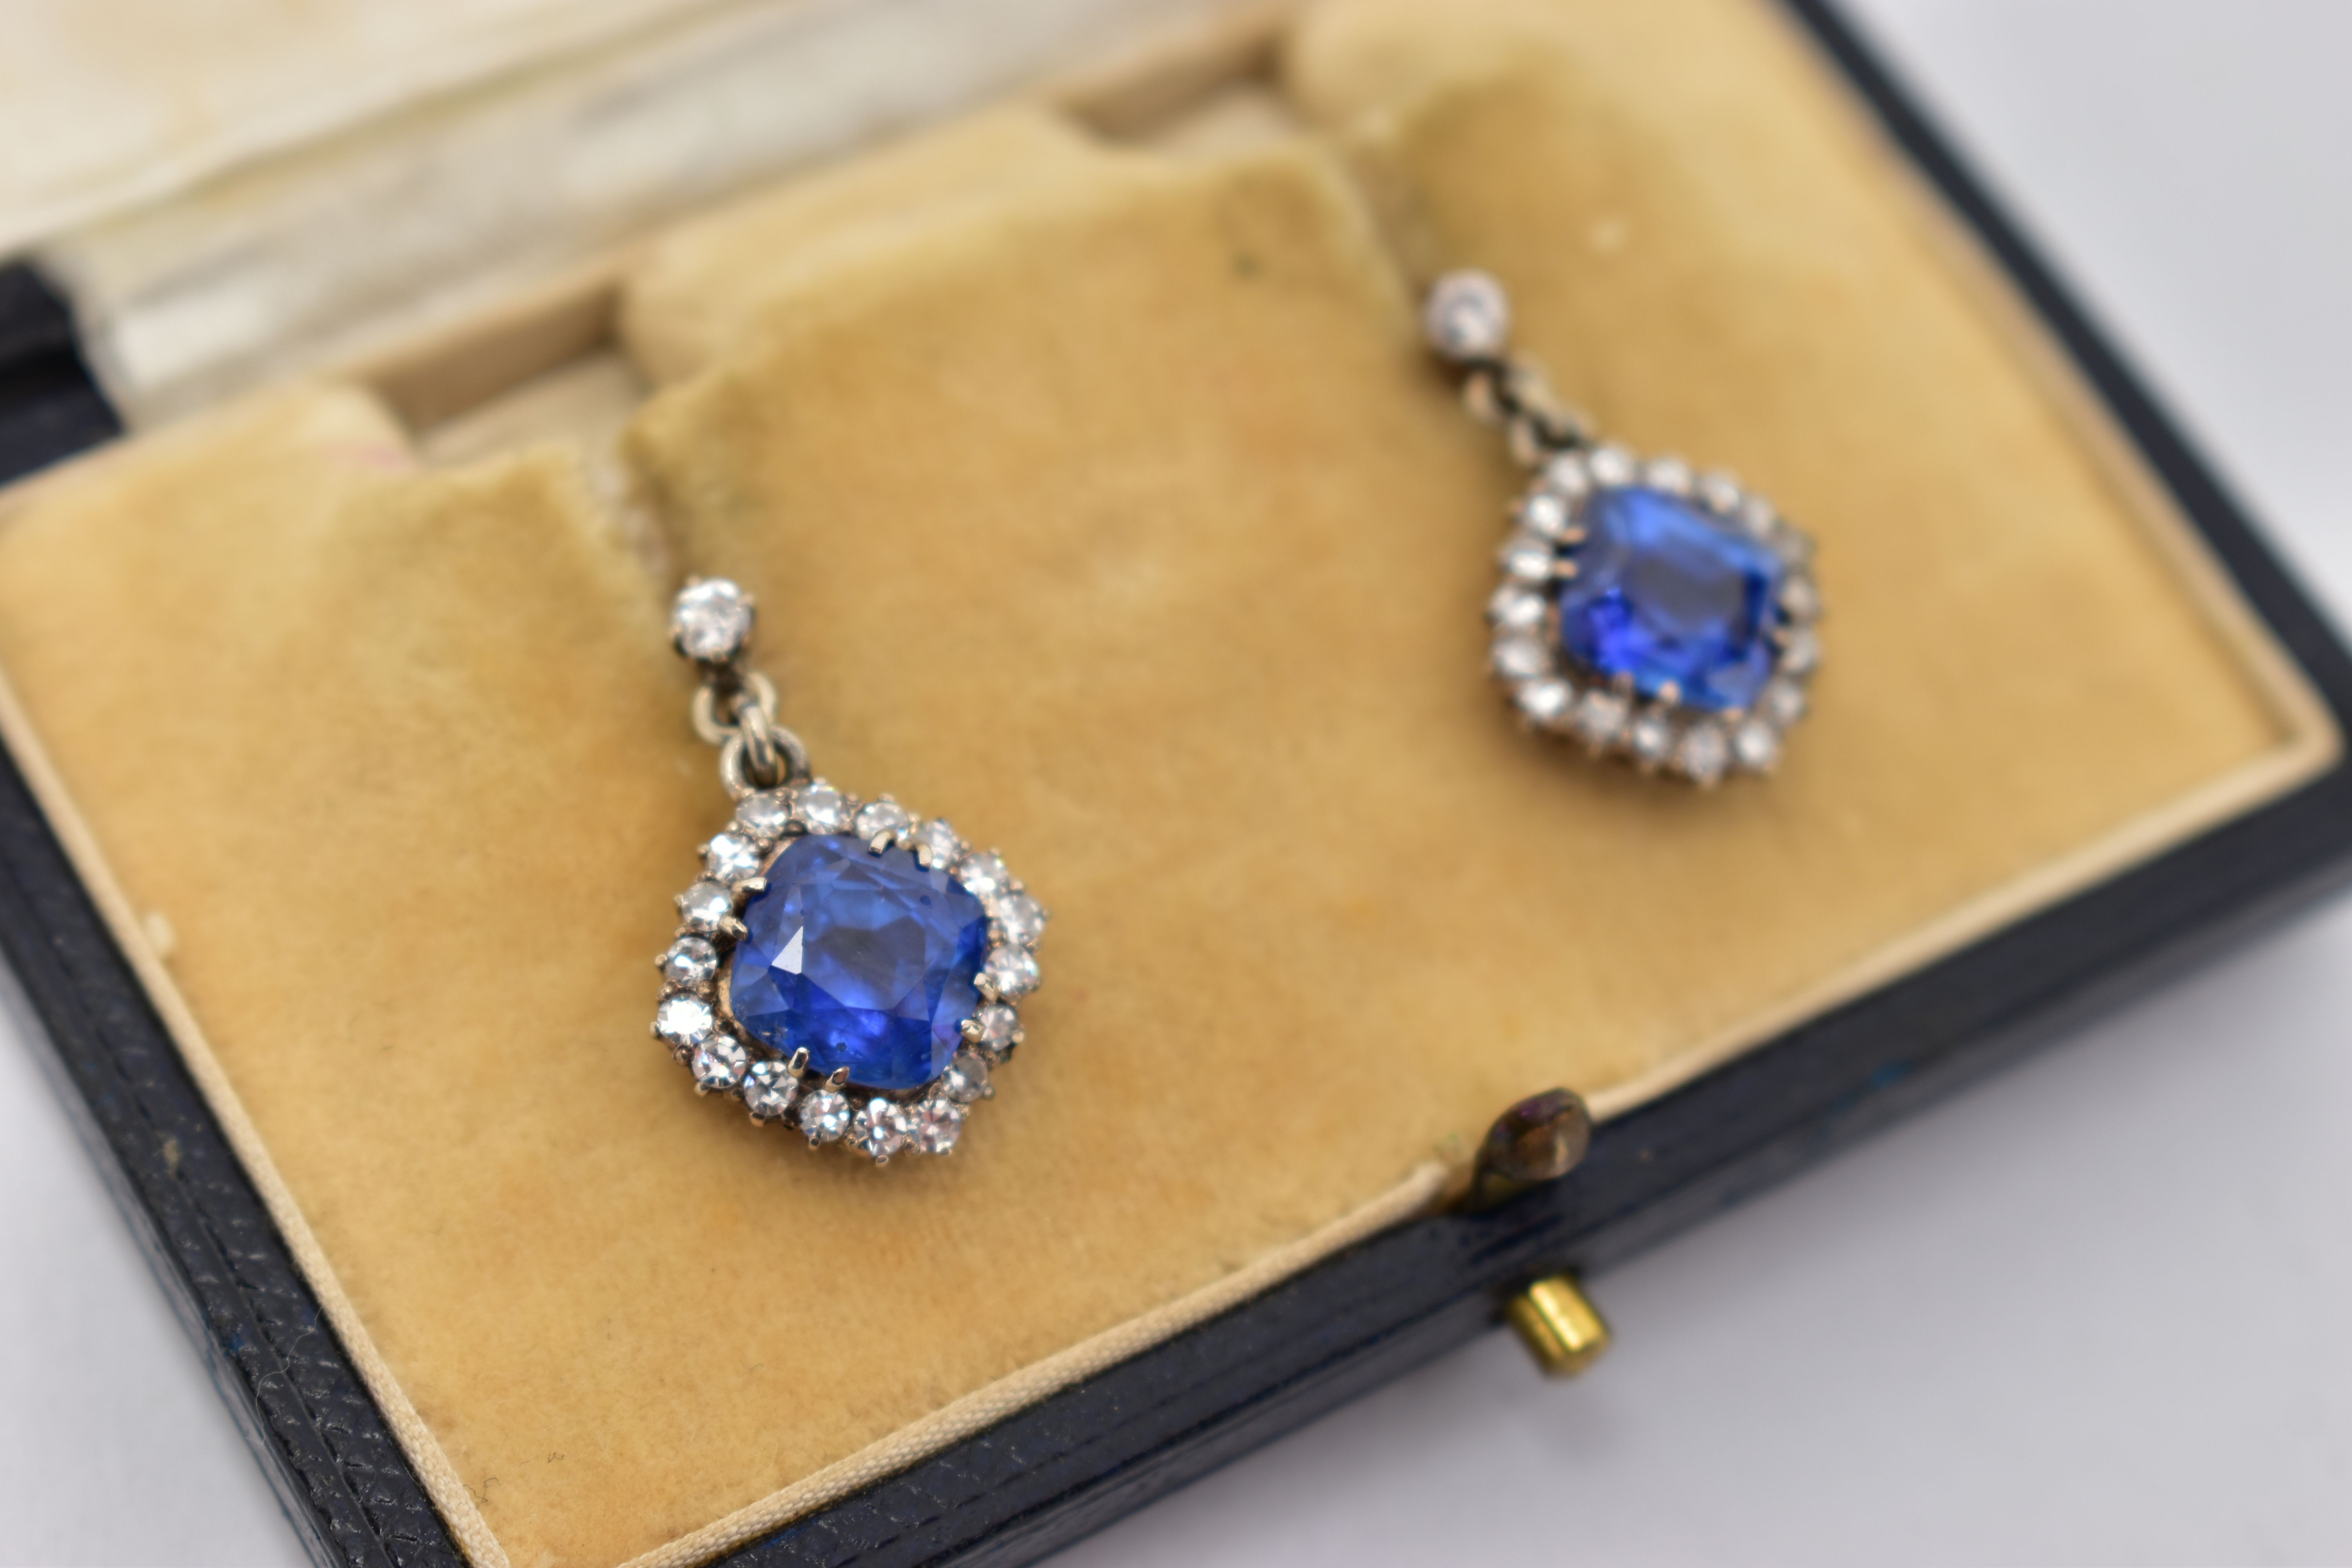 A PAIR OF EARLY 20TH CENTURY SAPPHIRE AND DIAMOND EARRINGS, each earring set with a cushion cut - Image 3 of 11